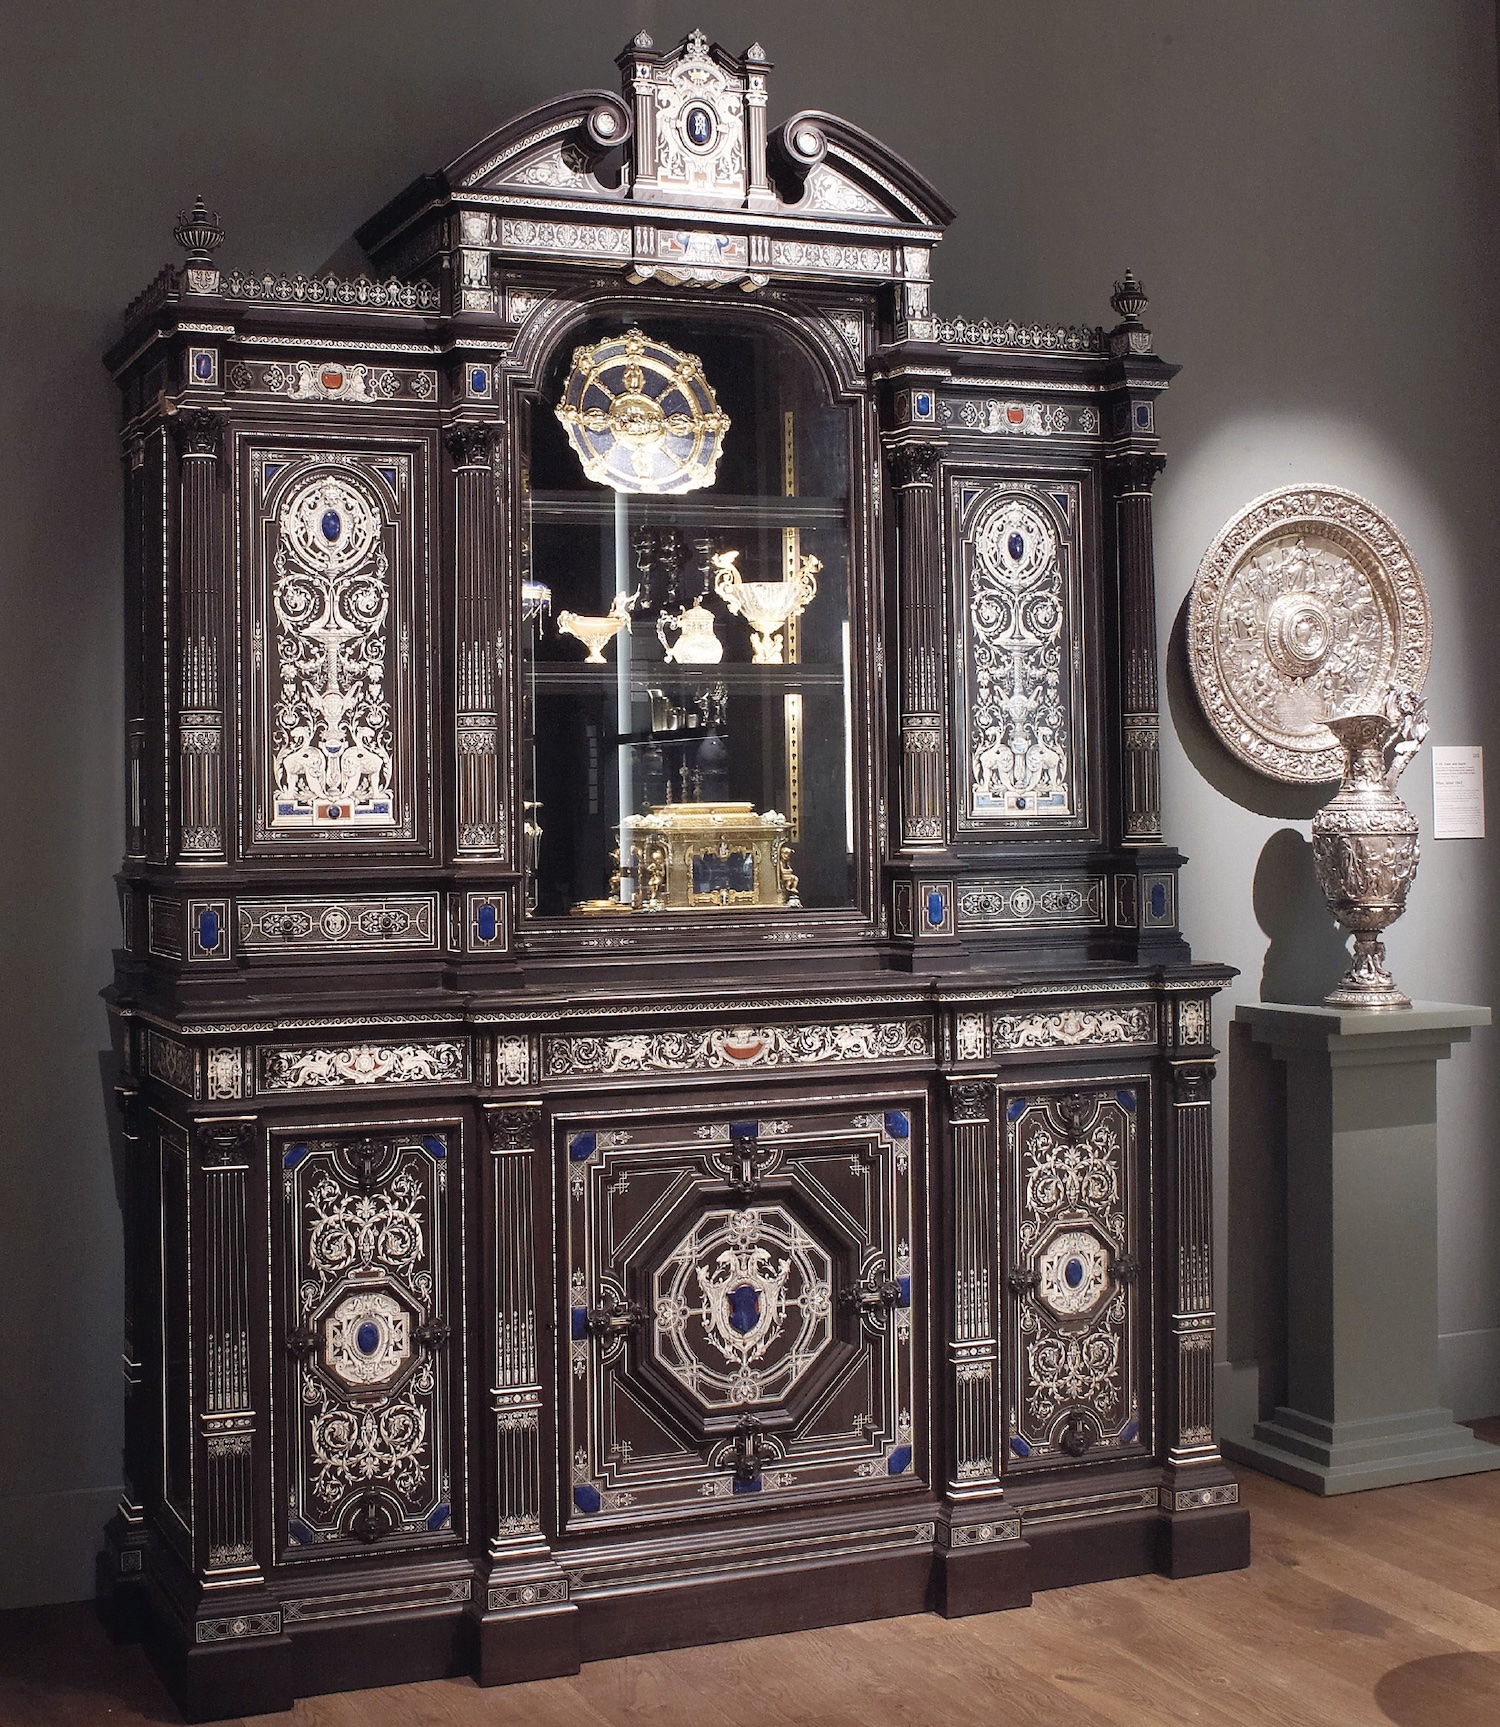 A High Renaissance cabinet in ivory and ebony designed by Alfred Lormier and made by Ole Petersen for Jackson & Graham